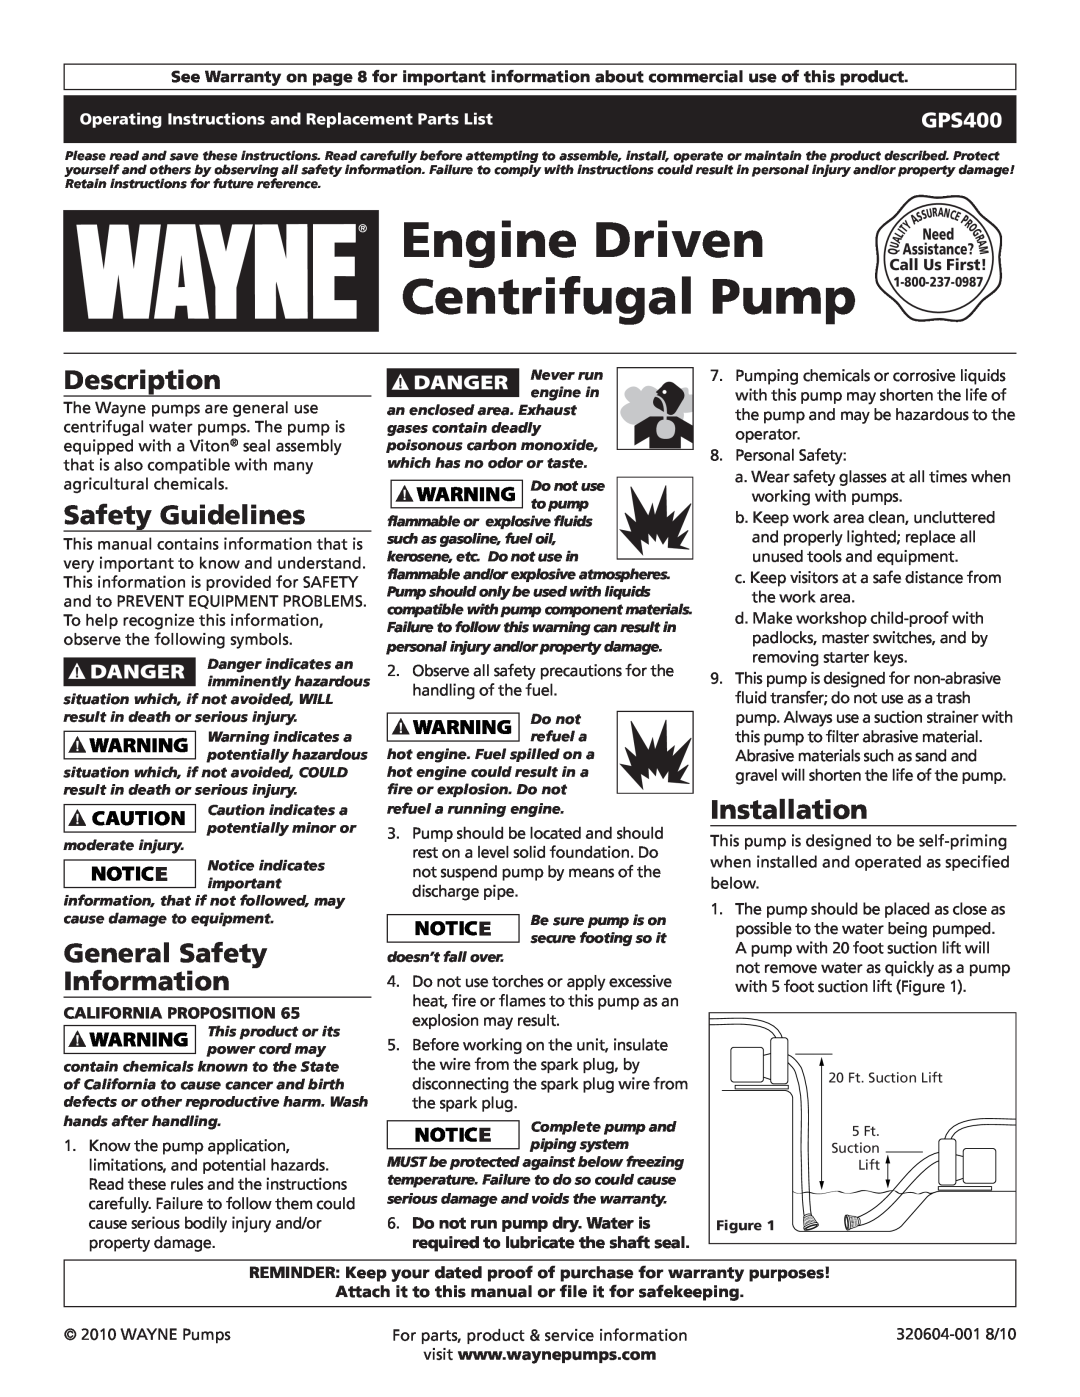 Wayne 320604-001 warranty Description, Safety Guidelines, General Safety Information, Installation, GPS400, Call Us First 